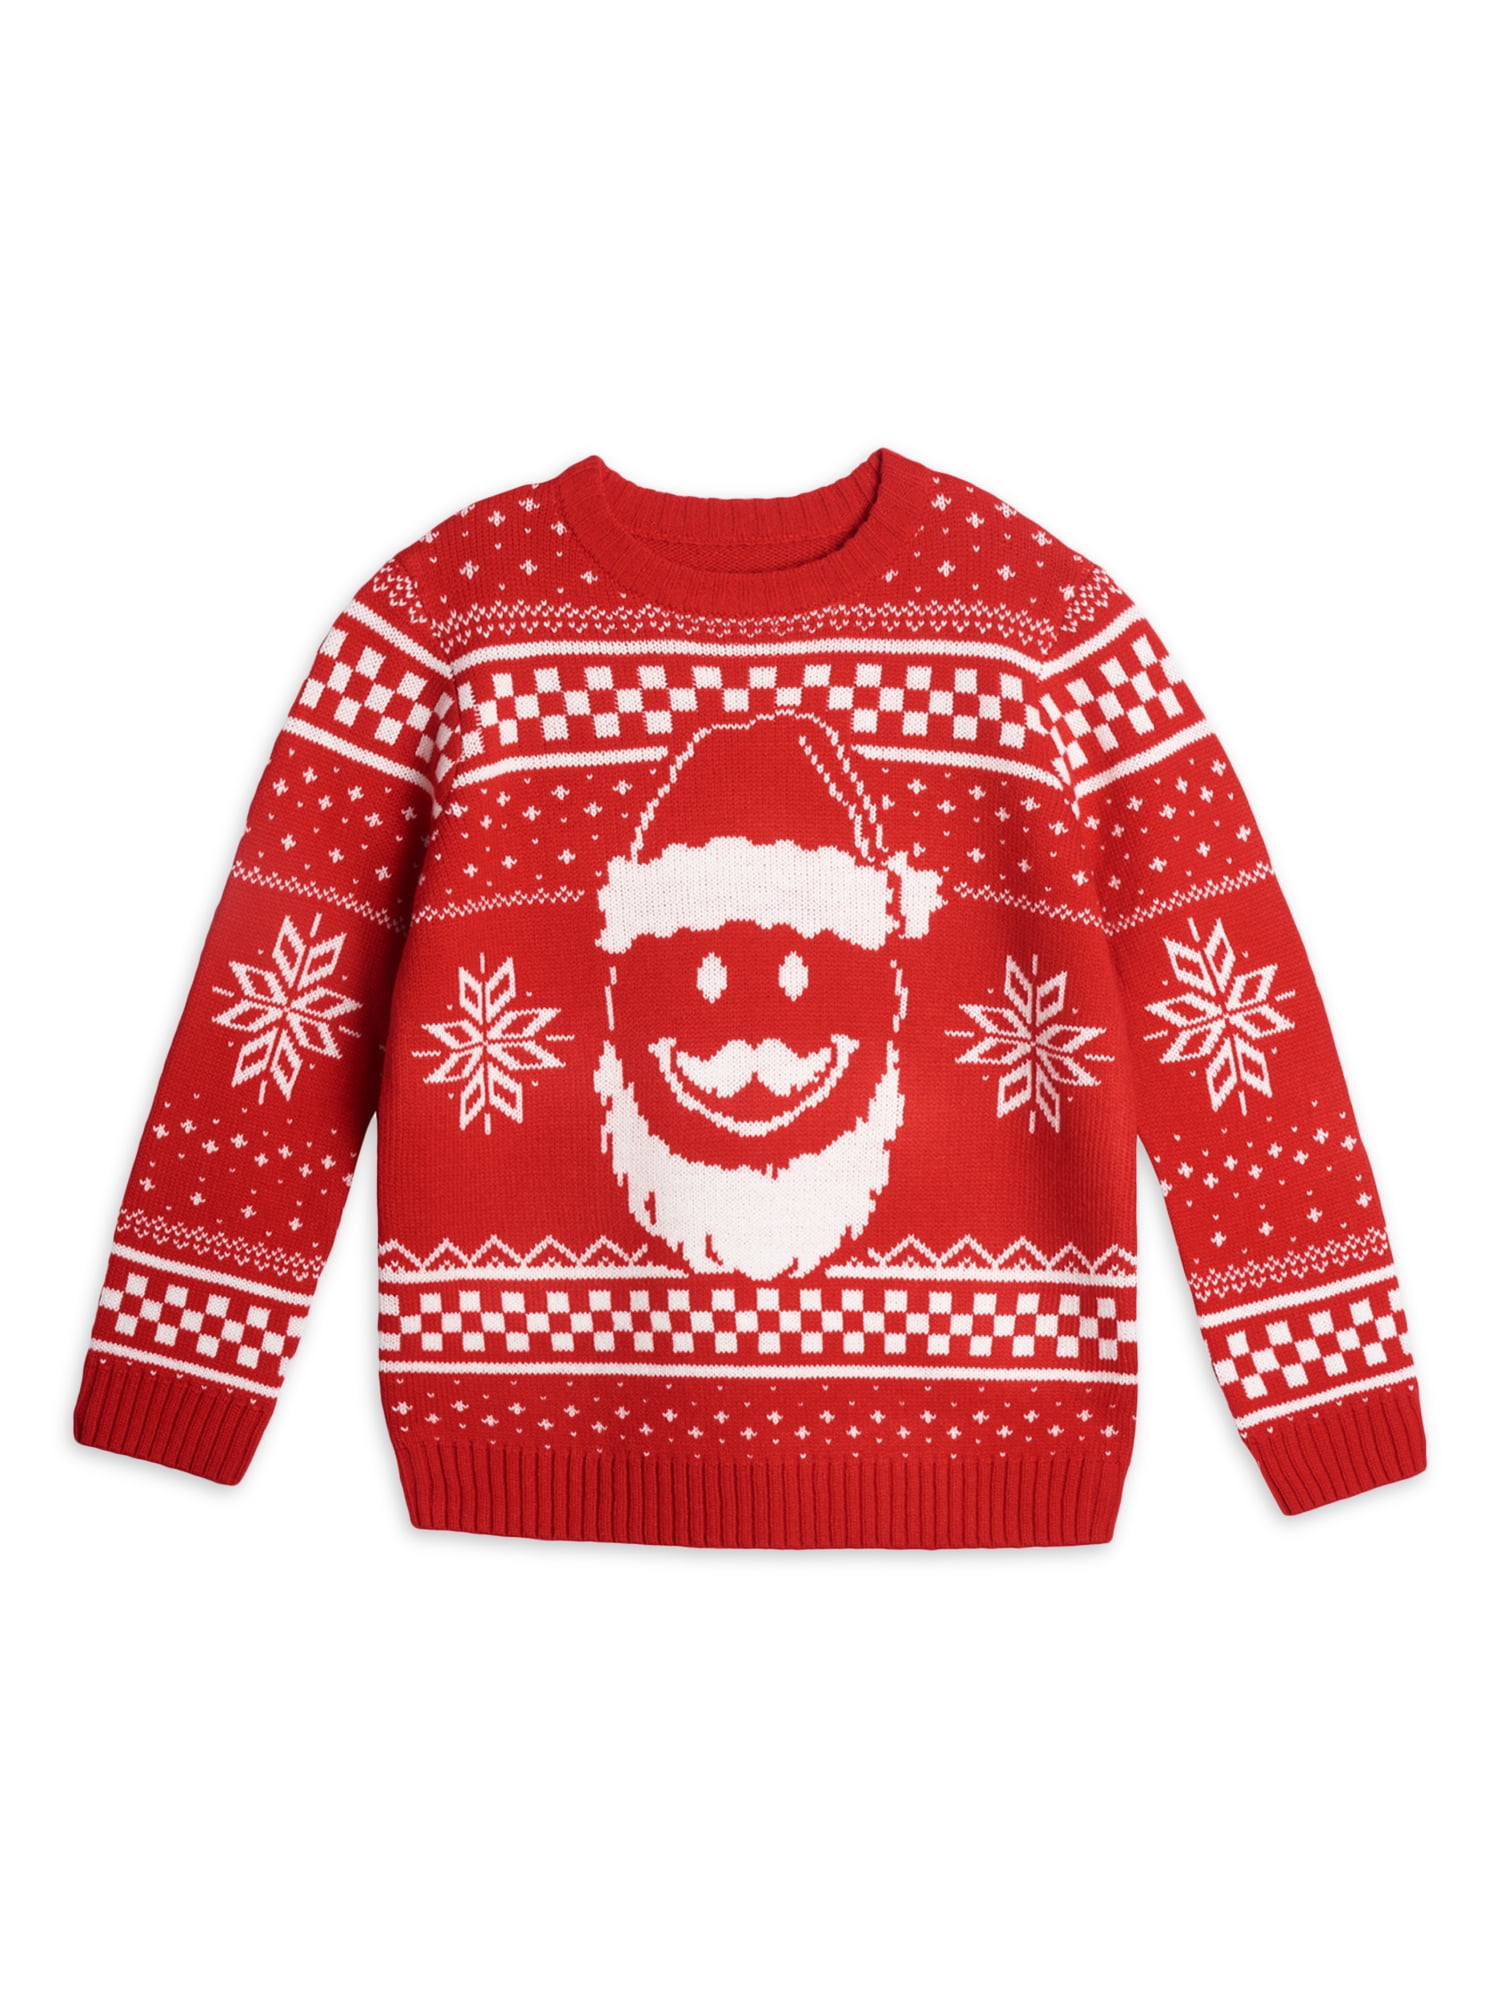 Holiday Time Toddler Boys Christmas Sweater, Sizes 2T-5T - Walmart.com